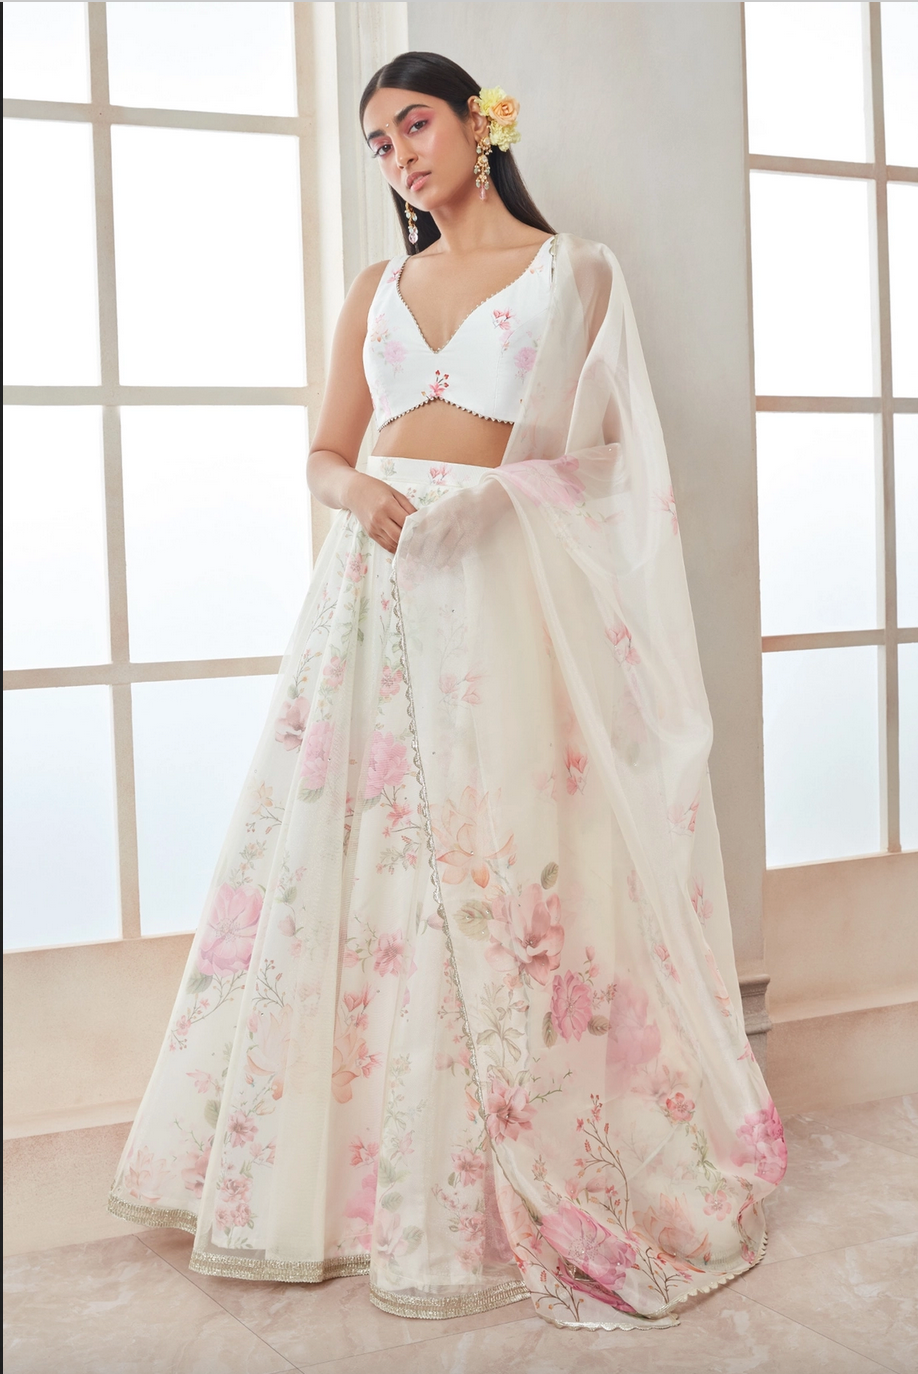 Indian Sky-blue Designer Lehenga Choli With Sequence Work For Wedding,  Party, Casual Wear Chaniya Choli Dress at Rs 2999.00 | Surat| ID:  24129879430